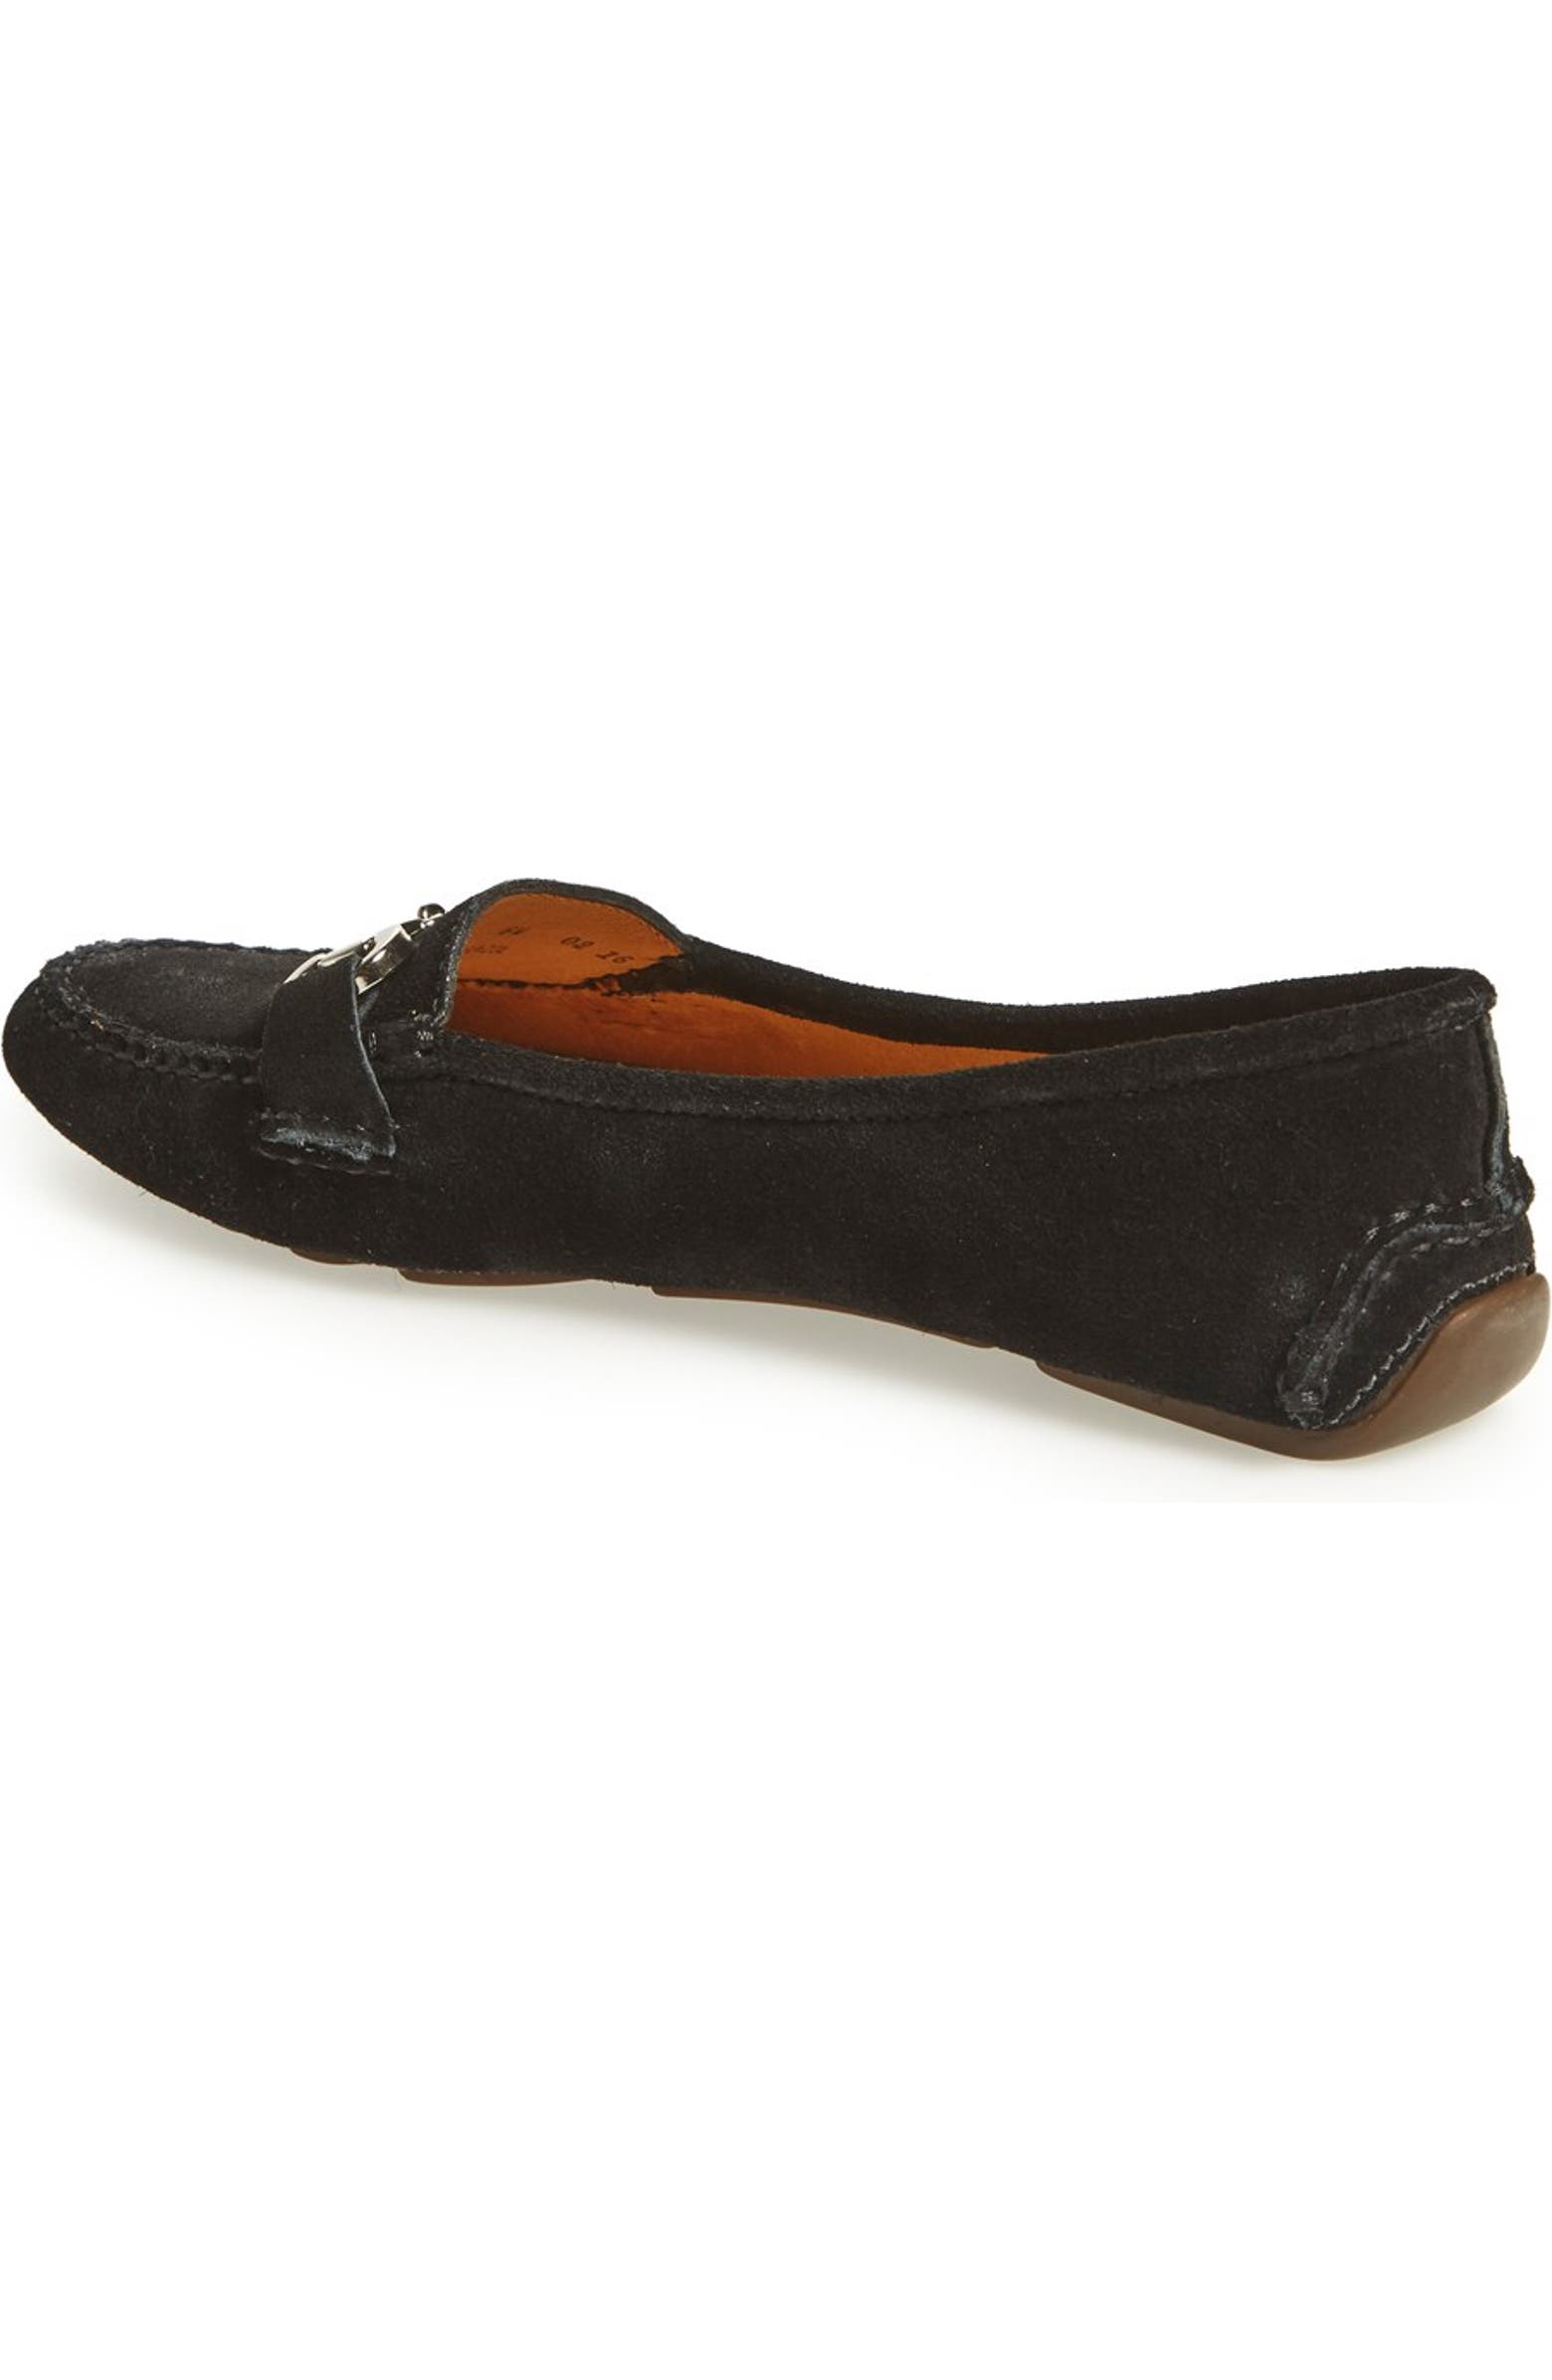 patricia green 'Carrie' Loafer (Women) | Nordstrom